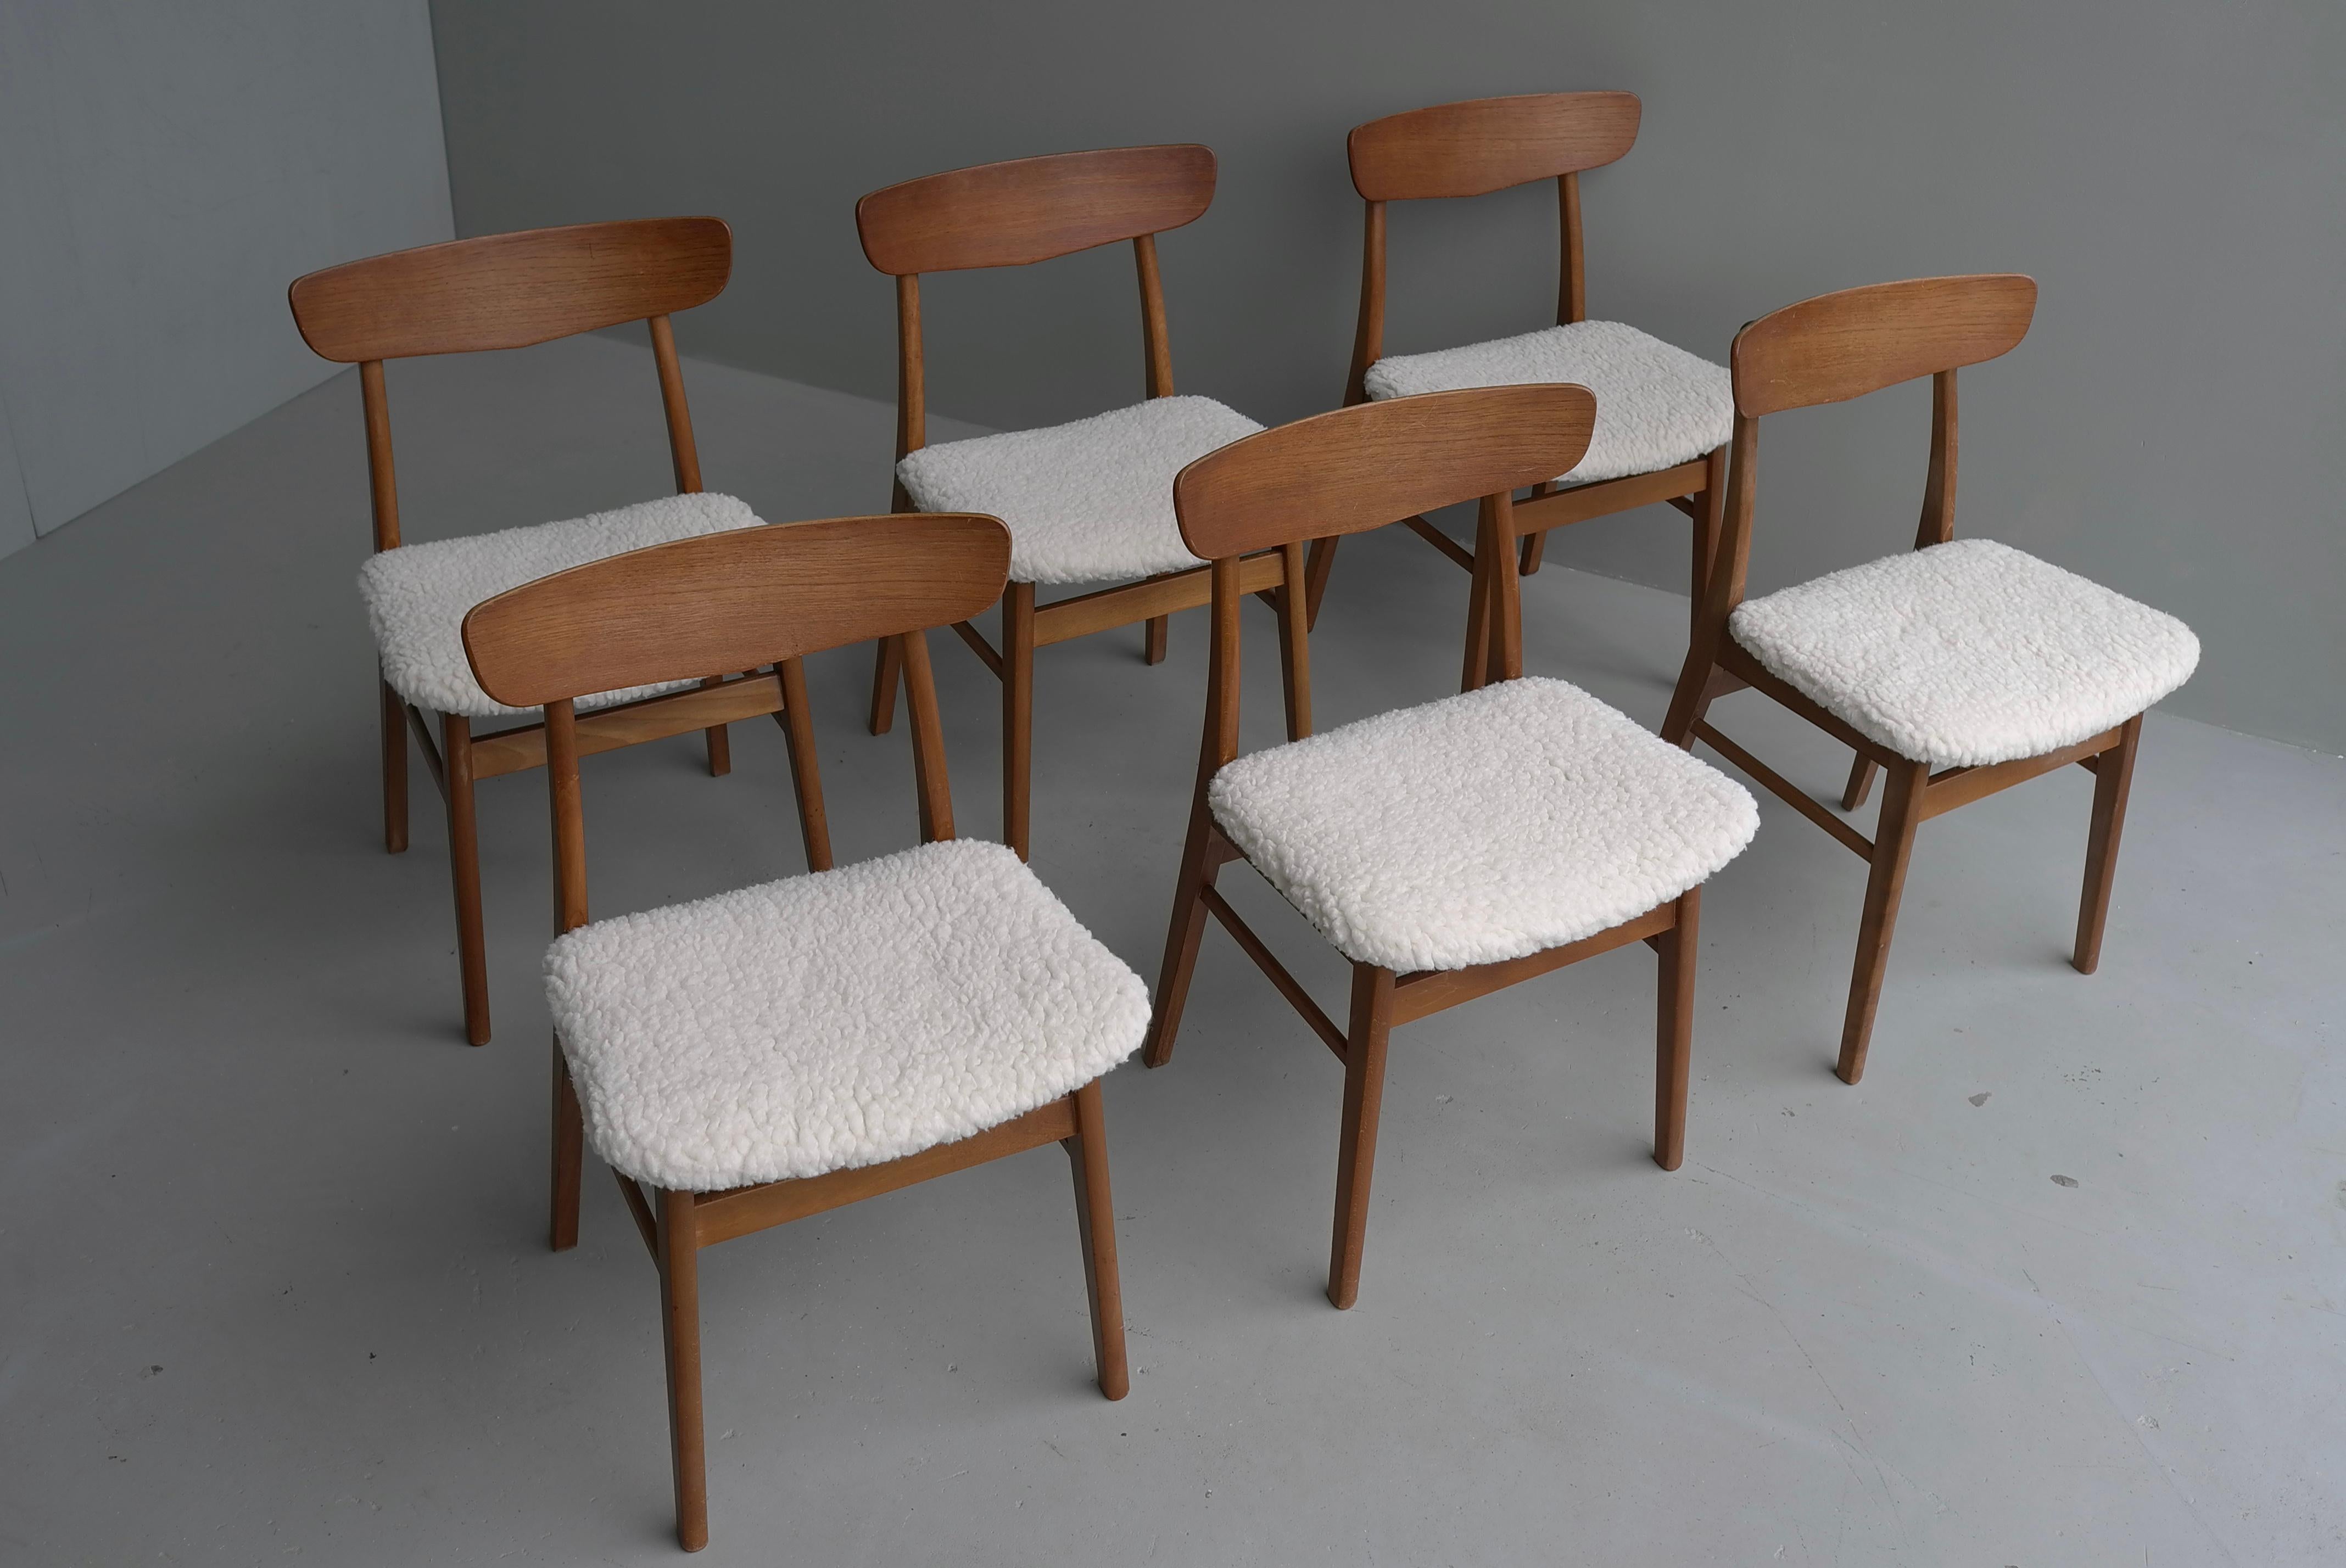 Six Teak Danish Heart Chairs with Seats in Pure Merino Wool, by Farstrup Møbler 3